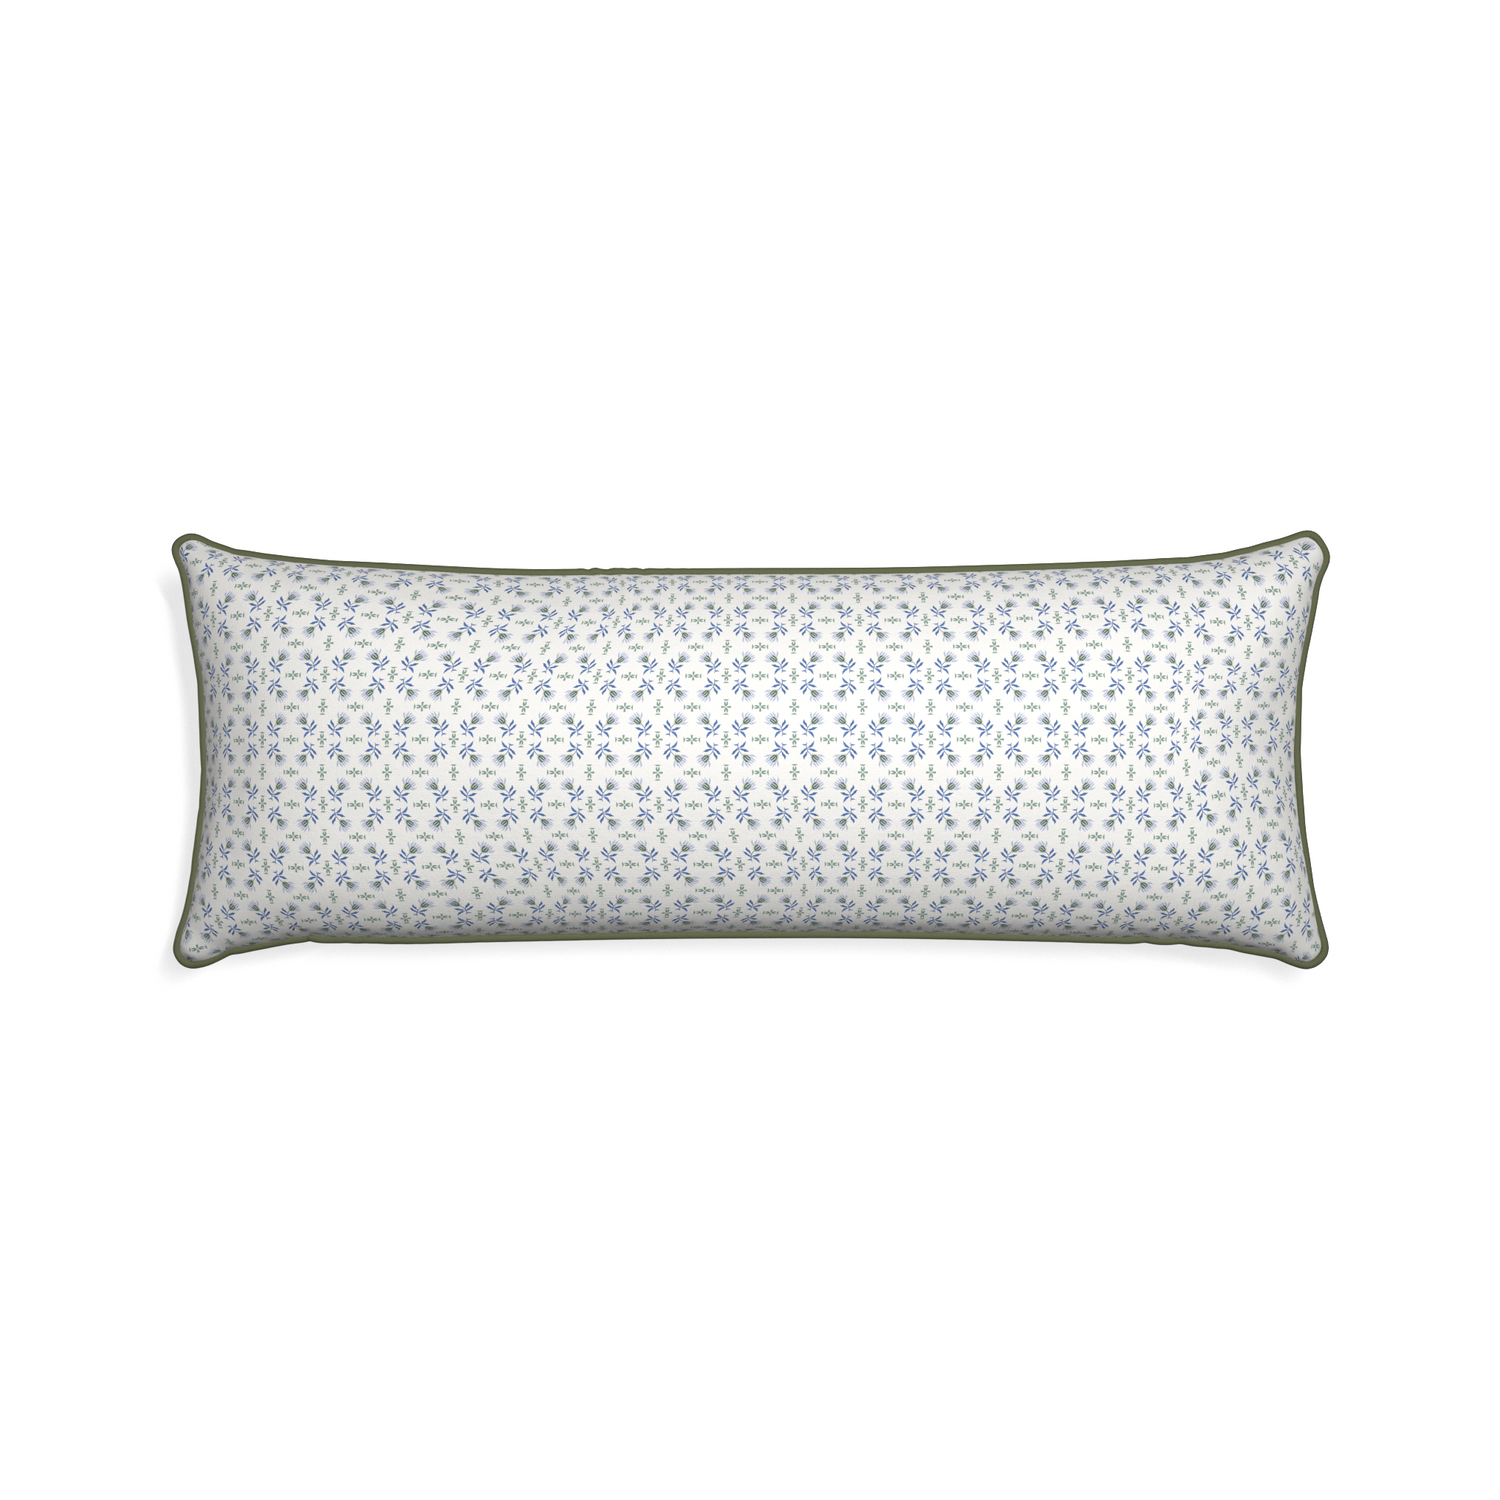 Xl-lumbar lee custom pillow with f piping on white background